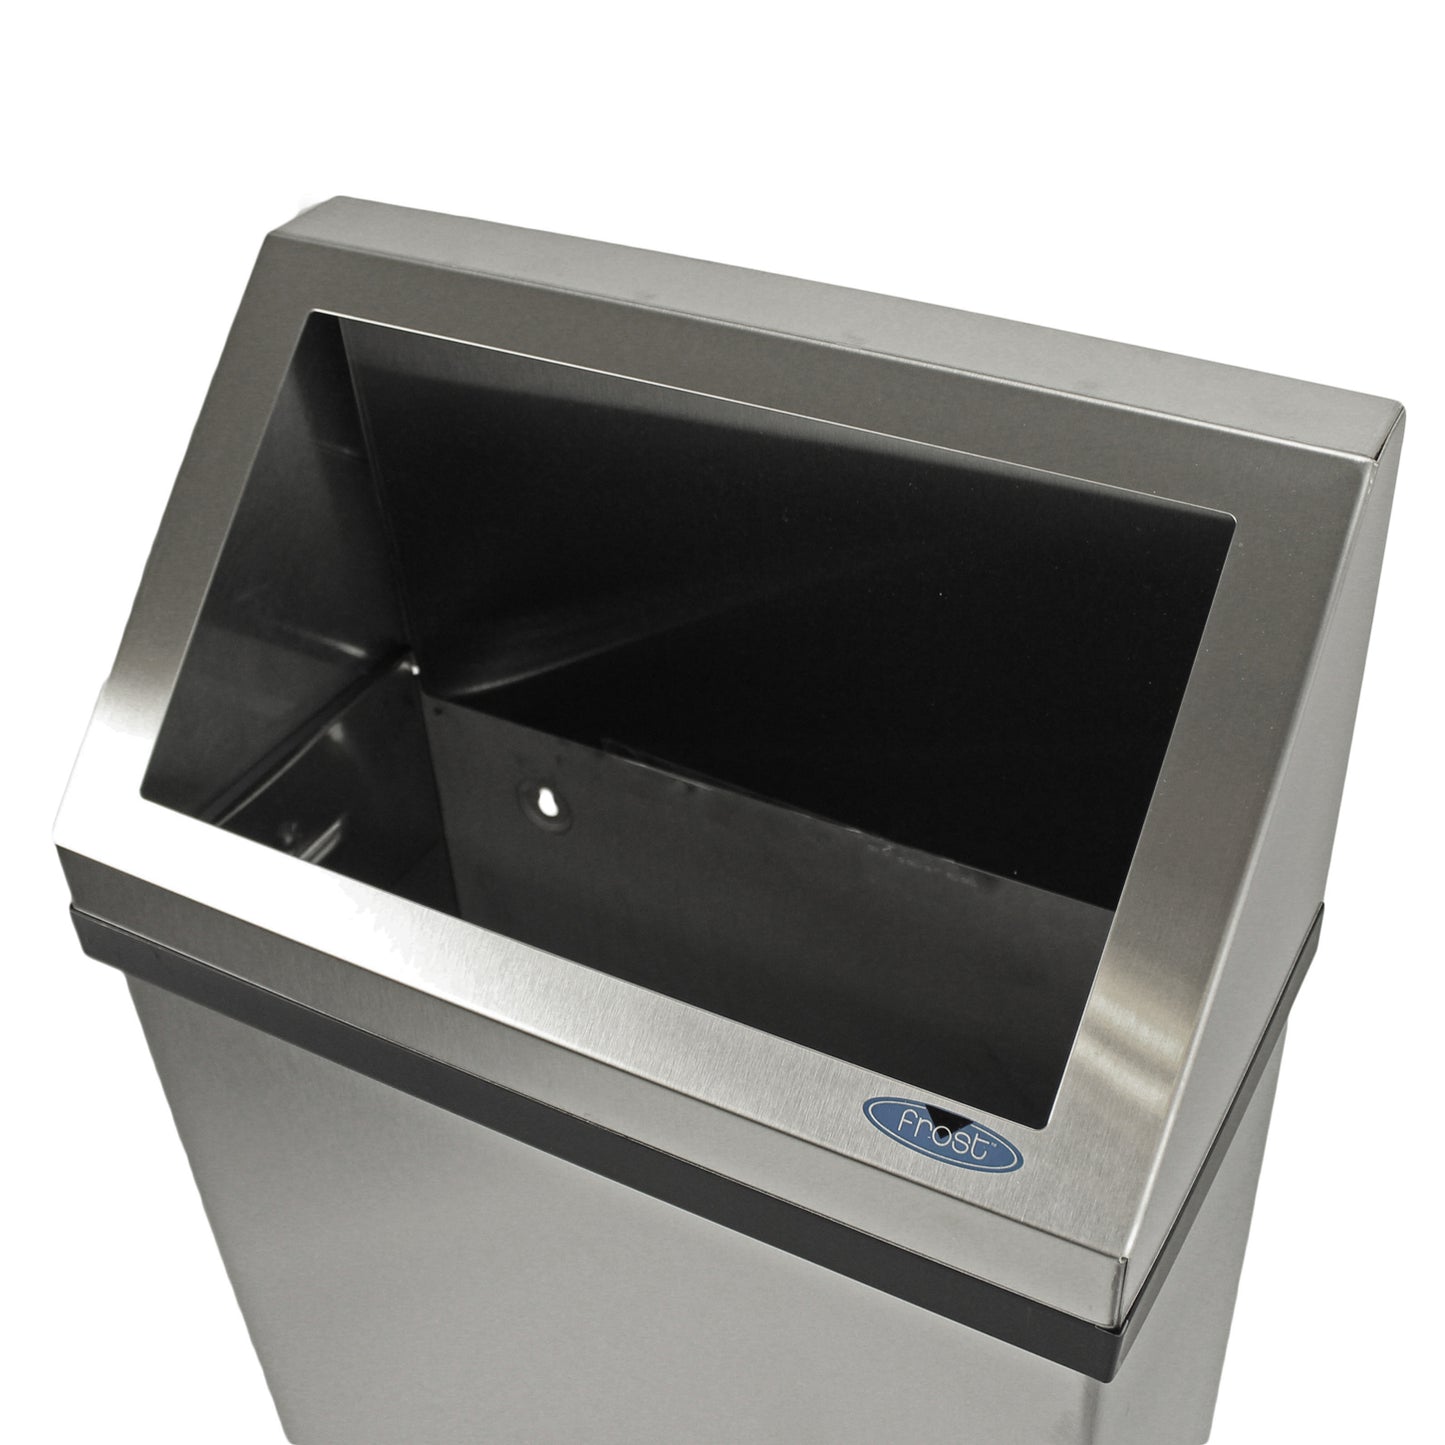 Frost Stainless Steel Liner Waste Receptacle Open View